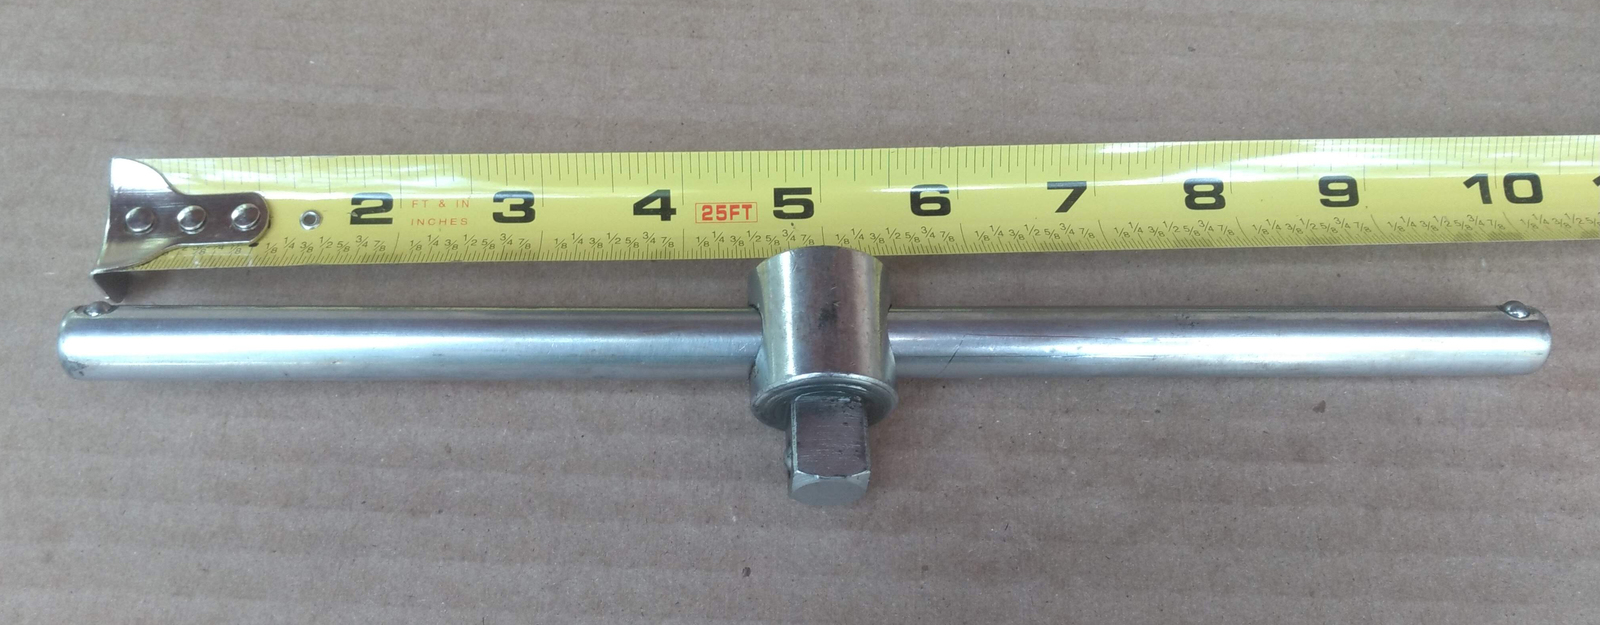 Primary image for Vintage Duro-Chrome 663 Slider T Tee Handle 1/2" Drive 10" Long Made in USA